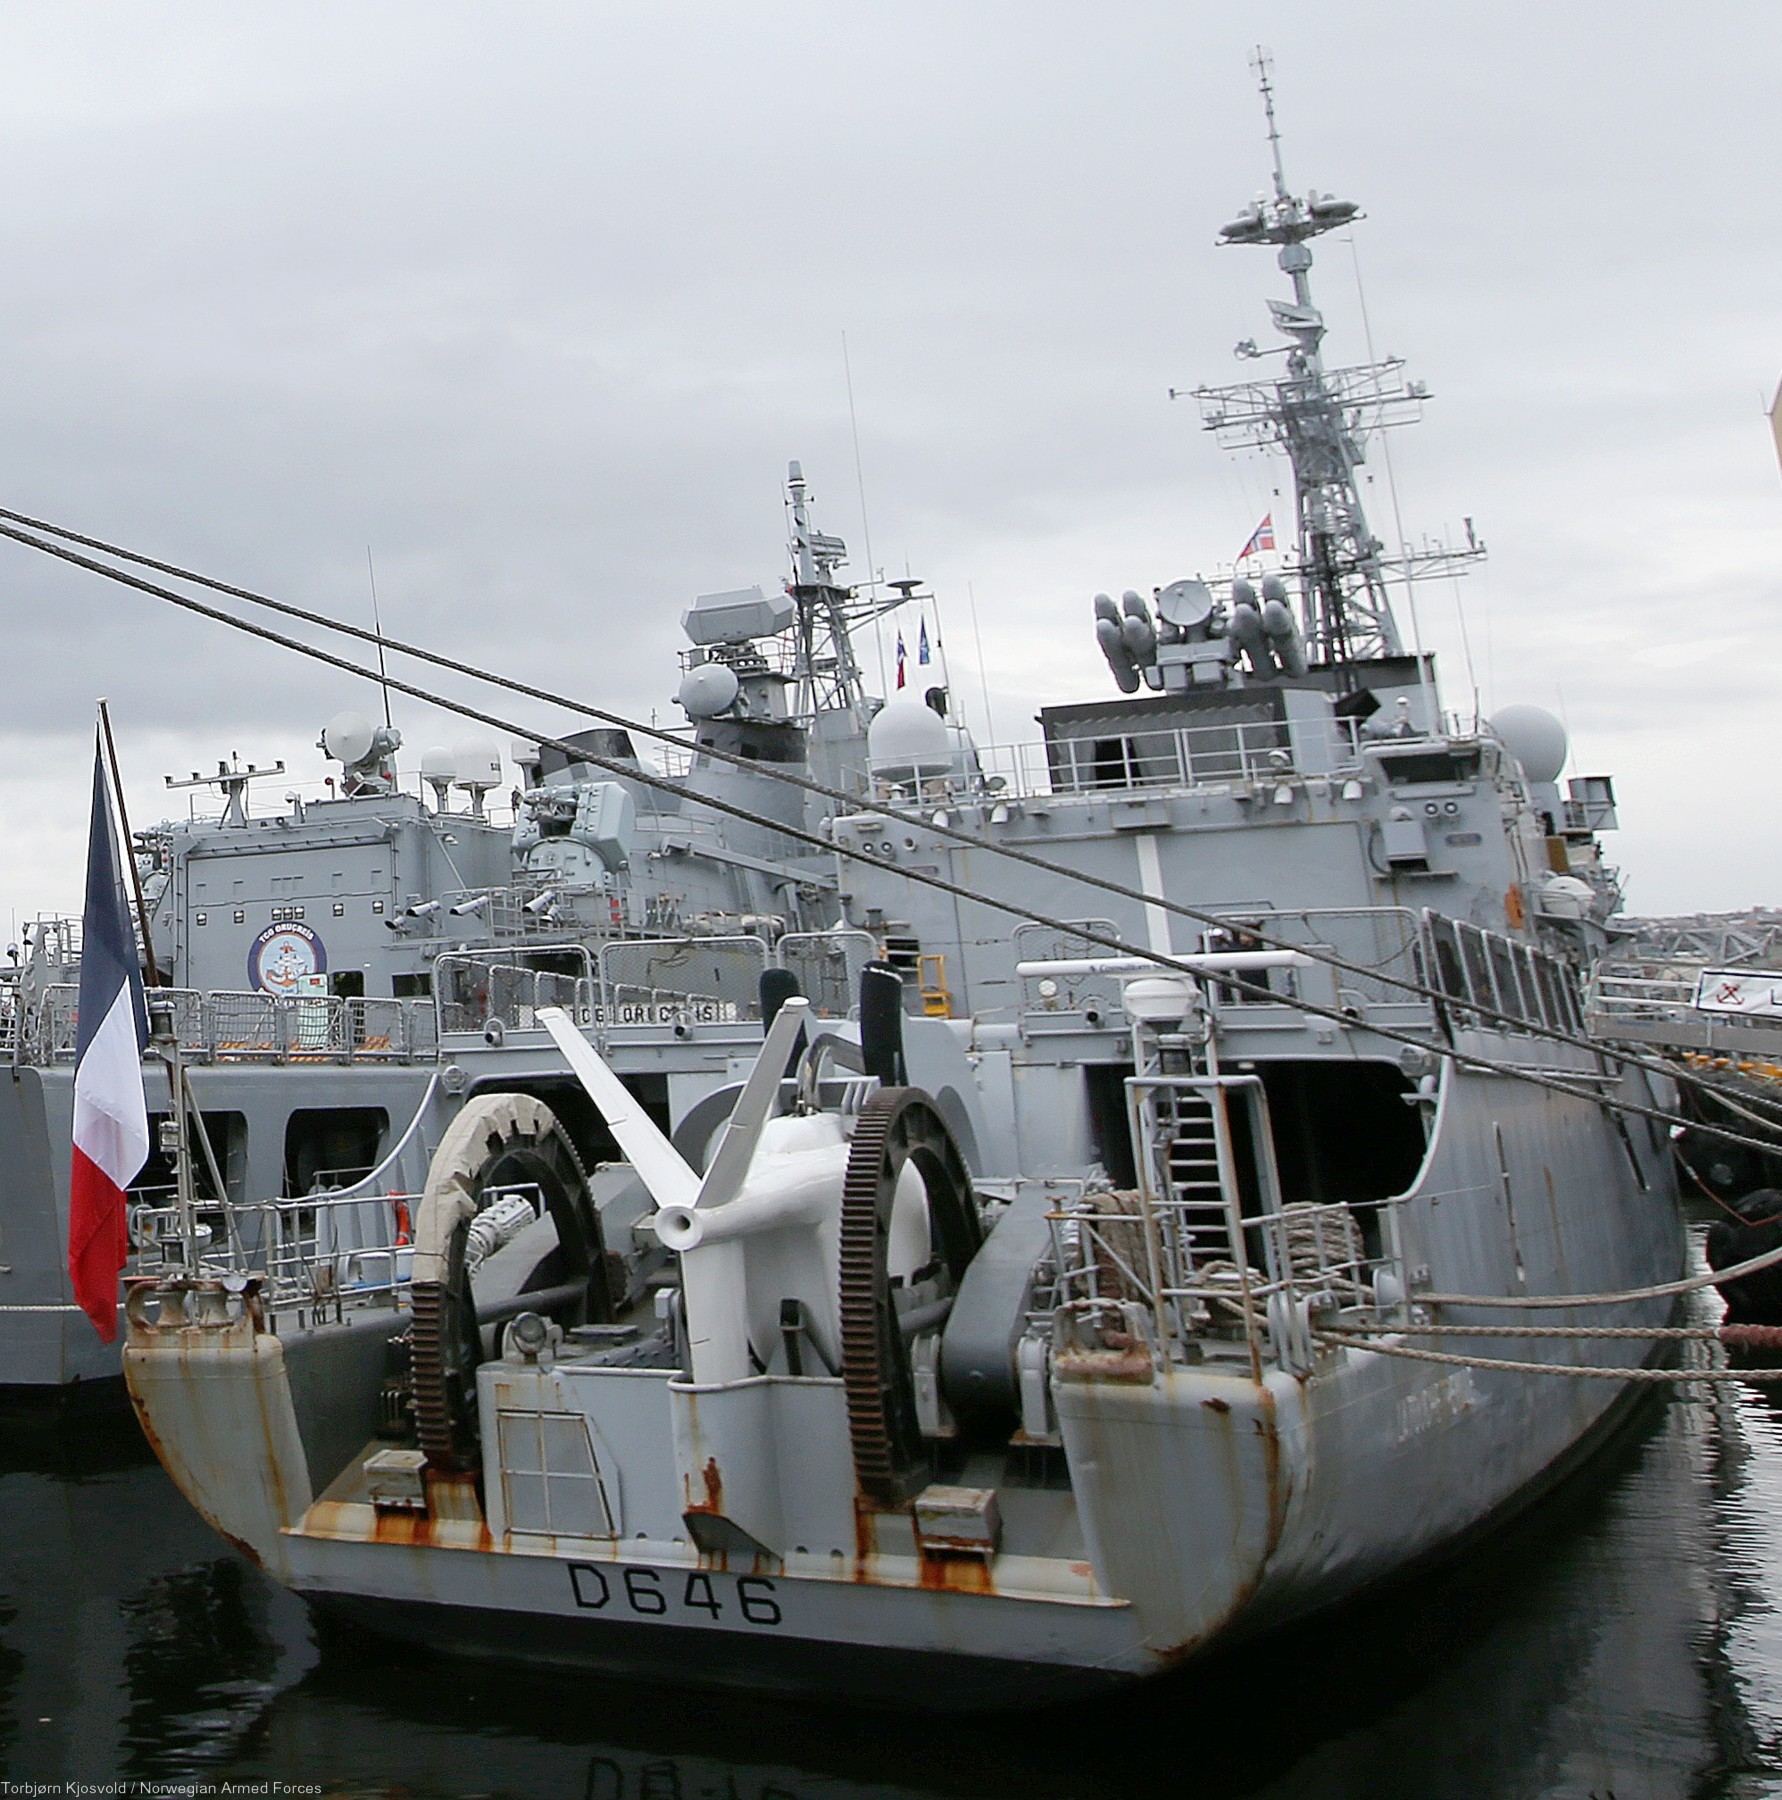 d-646 fs latouche treville f70as frigate destroyer asw french navy marine nationale 21